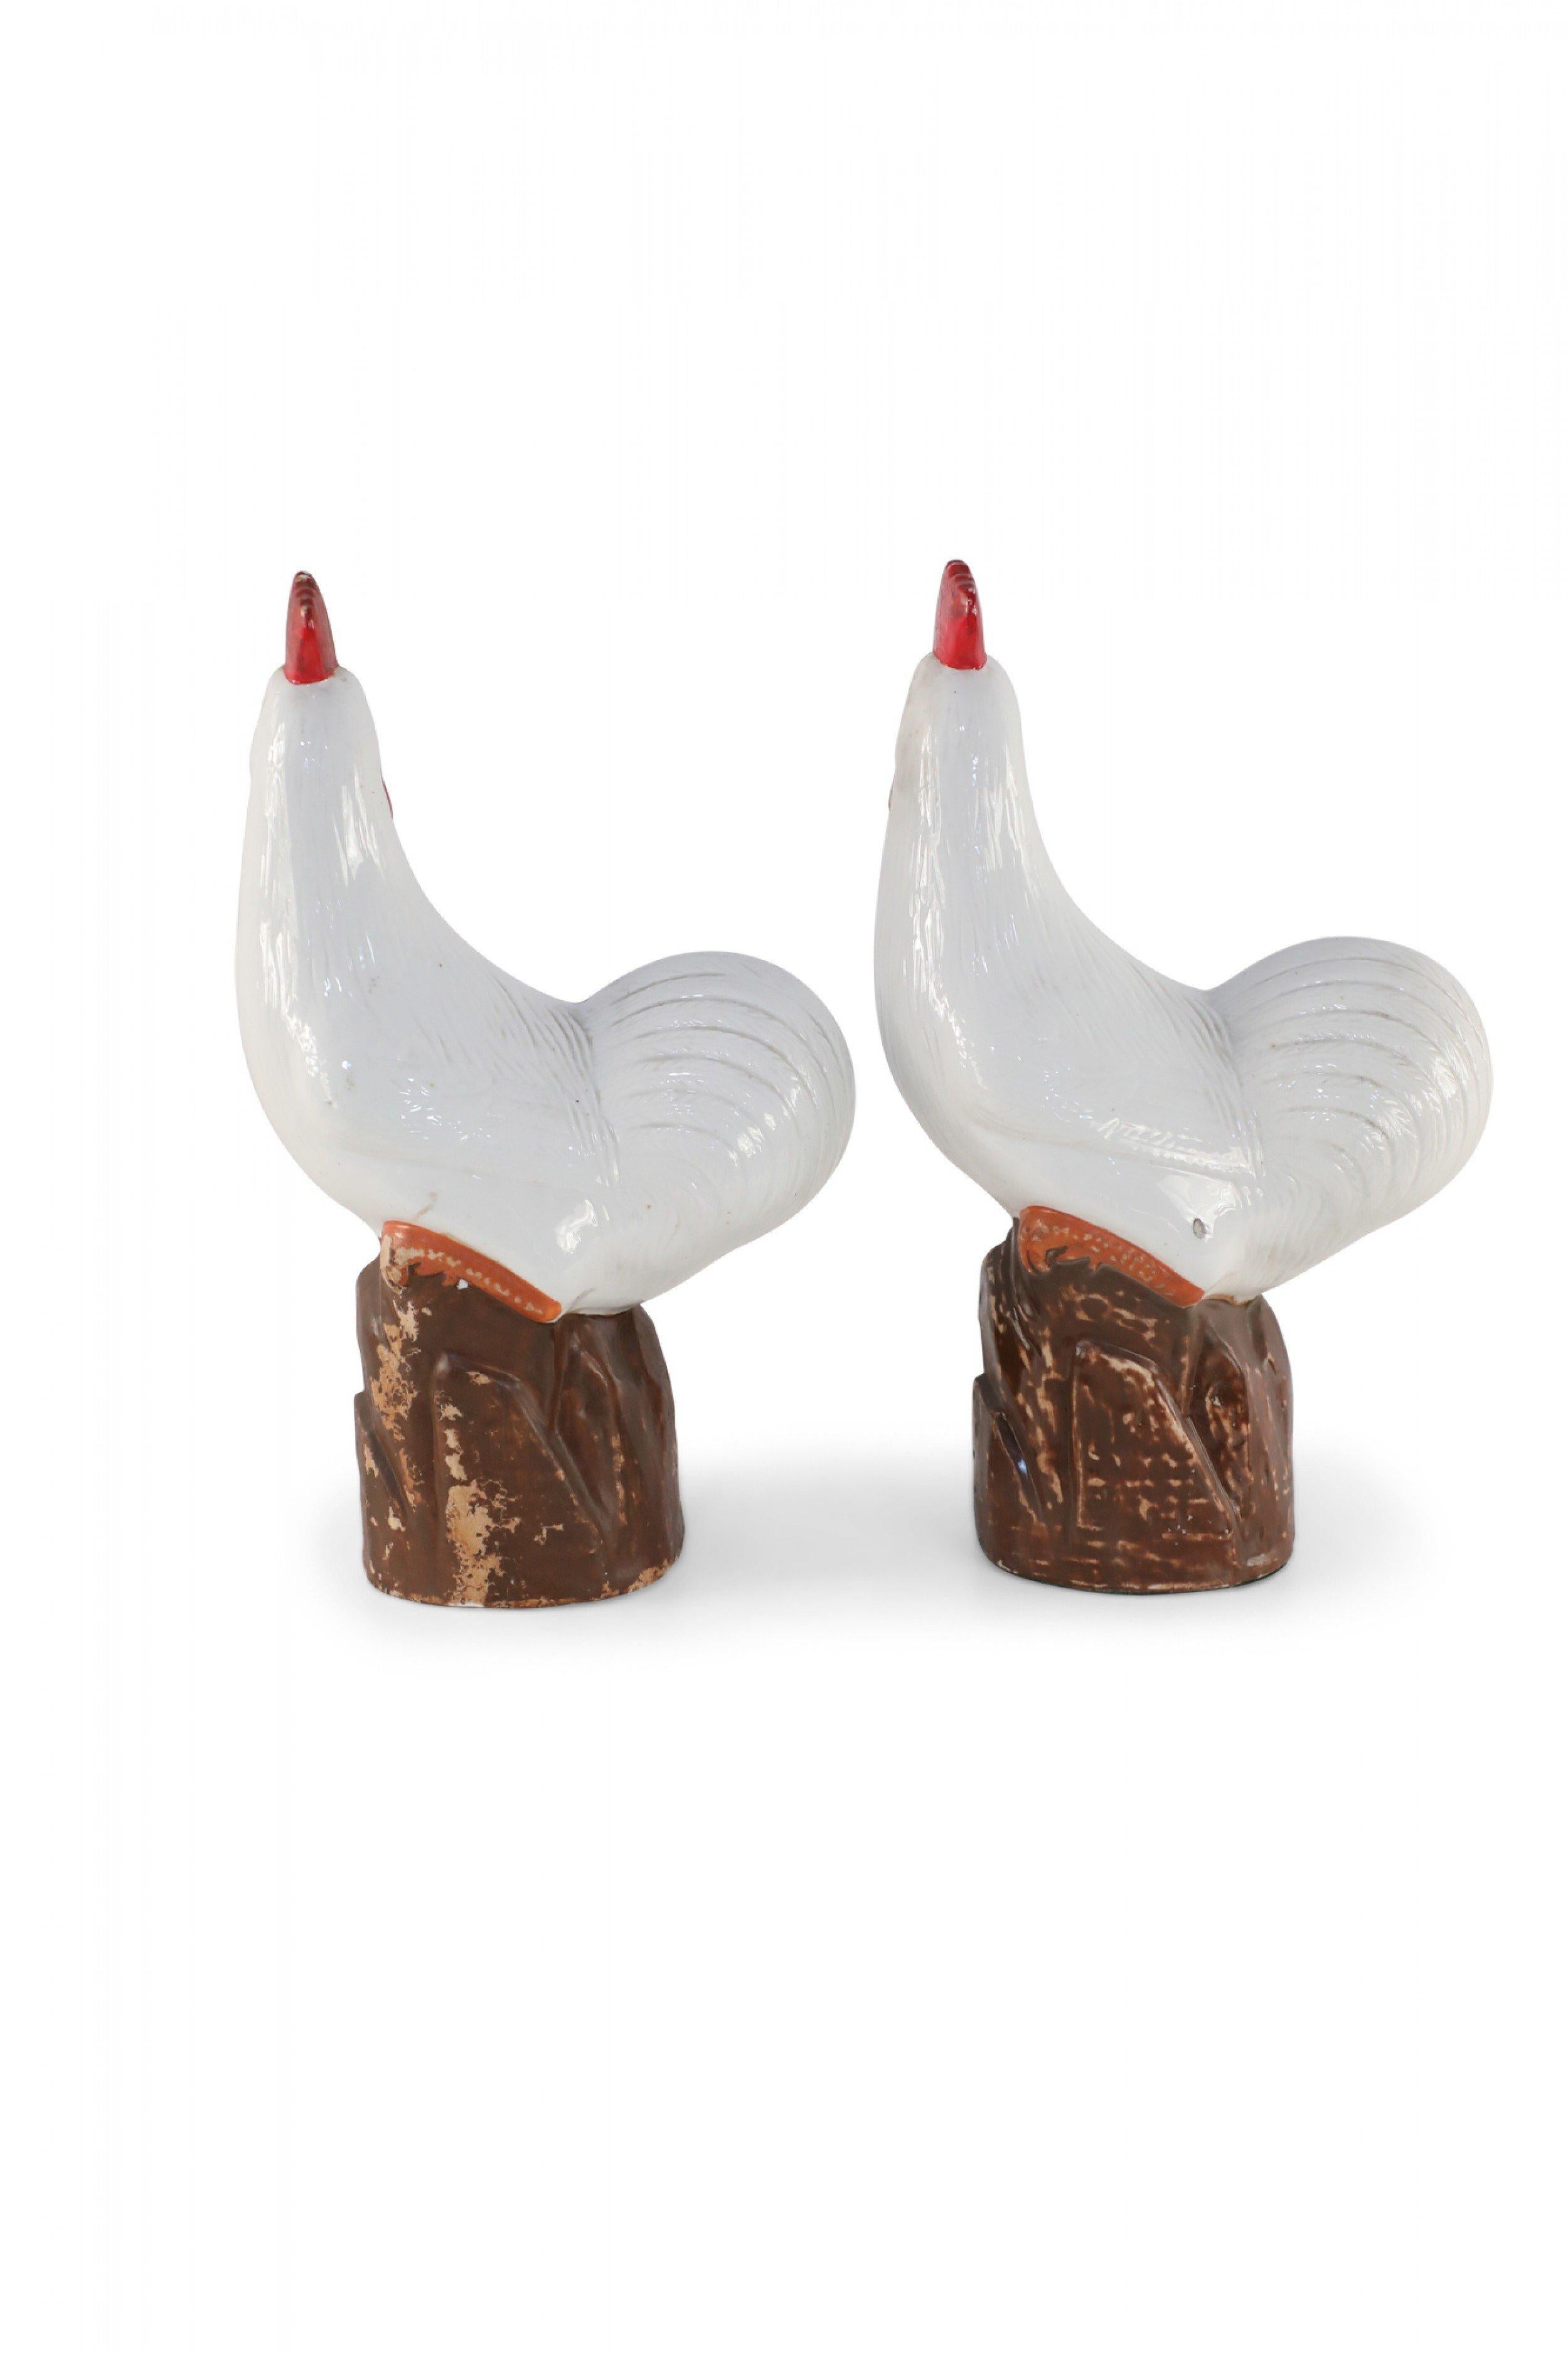 Pair of Chinese Mid-Century White Porcelain Chickens For Sale 3